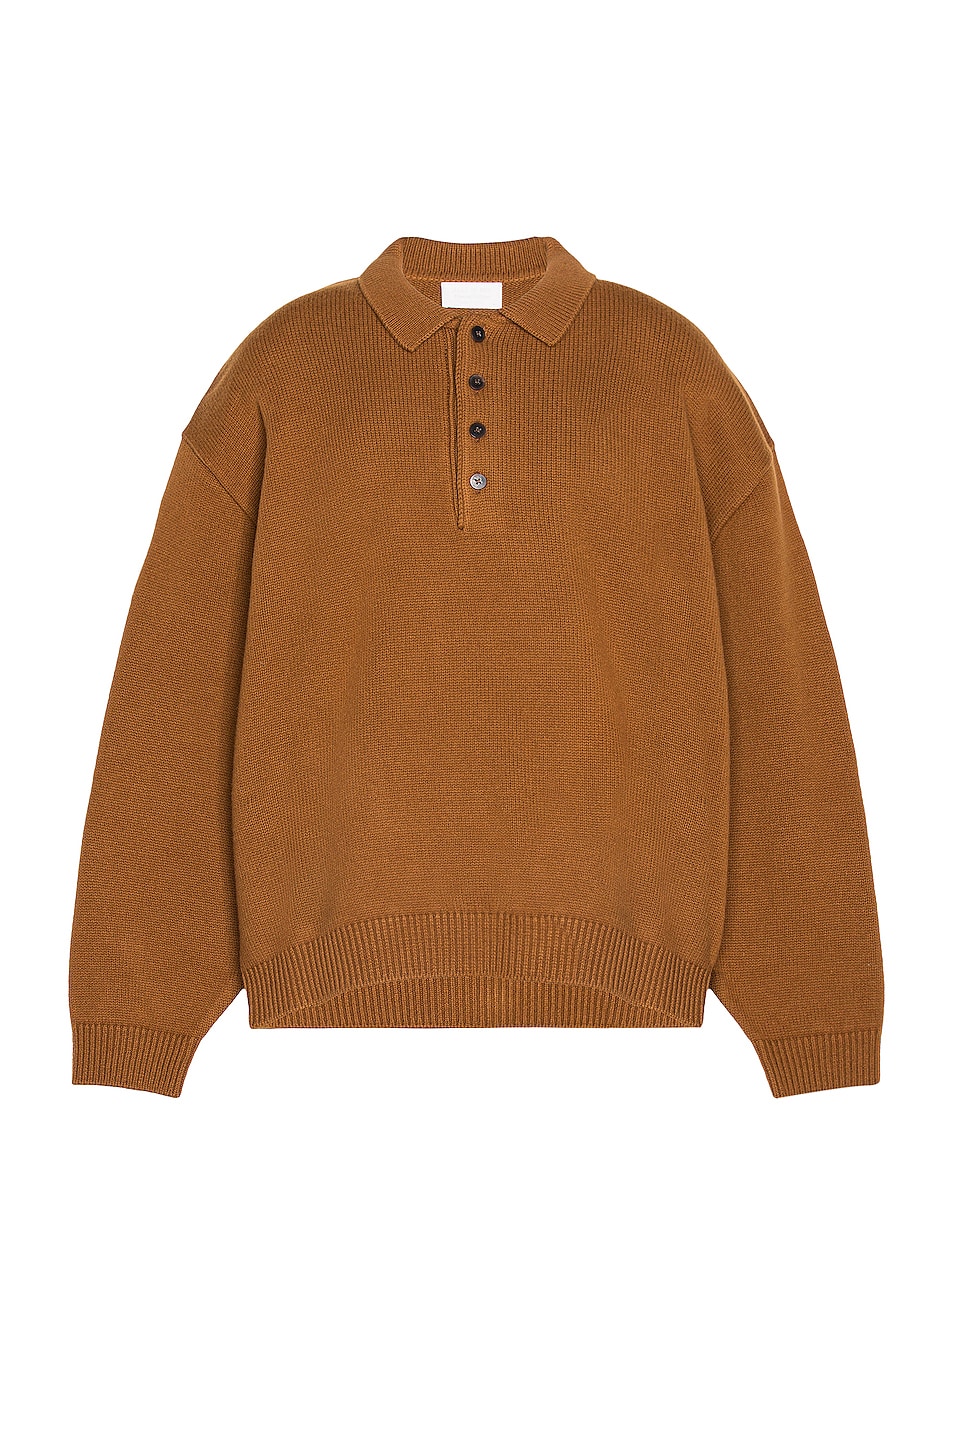 Image 1 of Fear of God Exclusively for Ermenegildo Zegna Polo Shirt in Vicuna